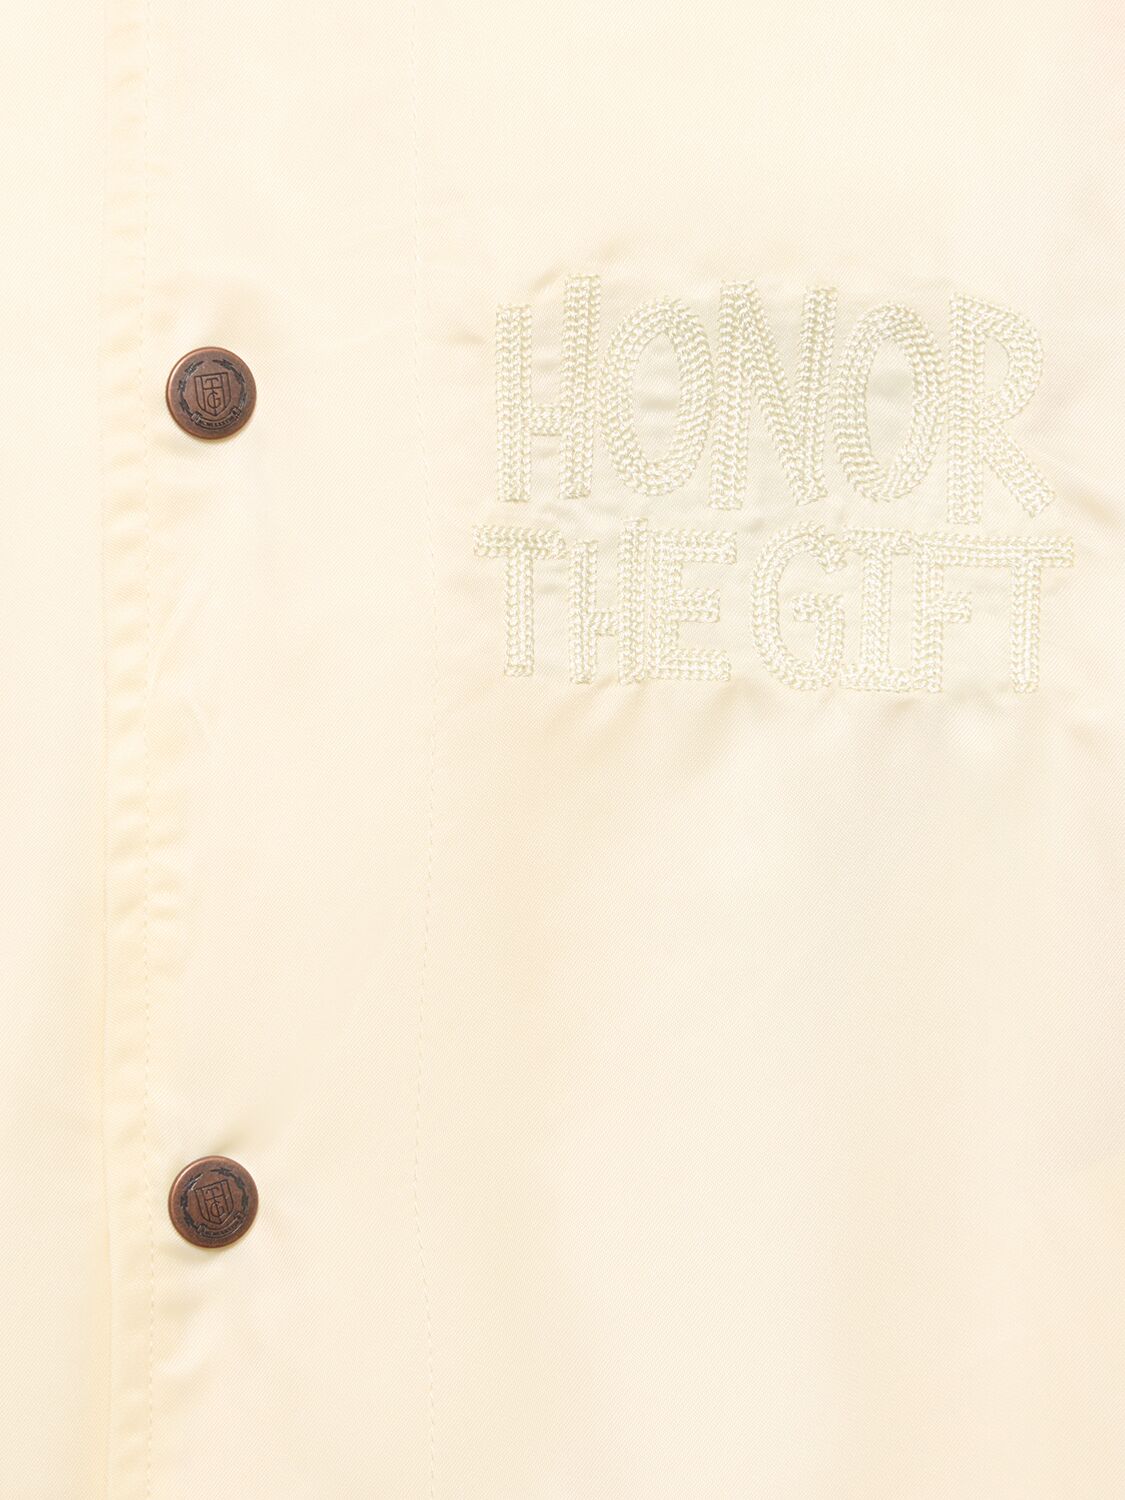 Shop Honor The Gift Satin Bomber Jacket In Bone